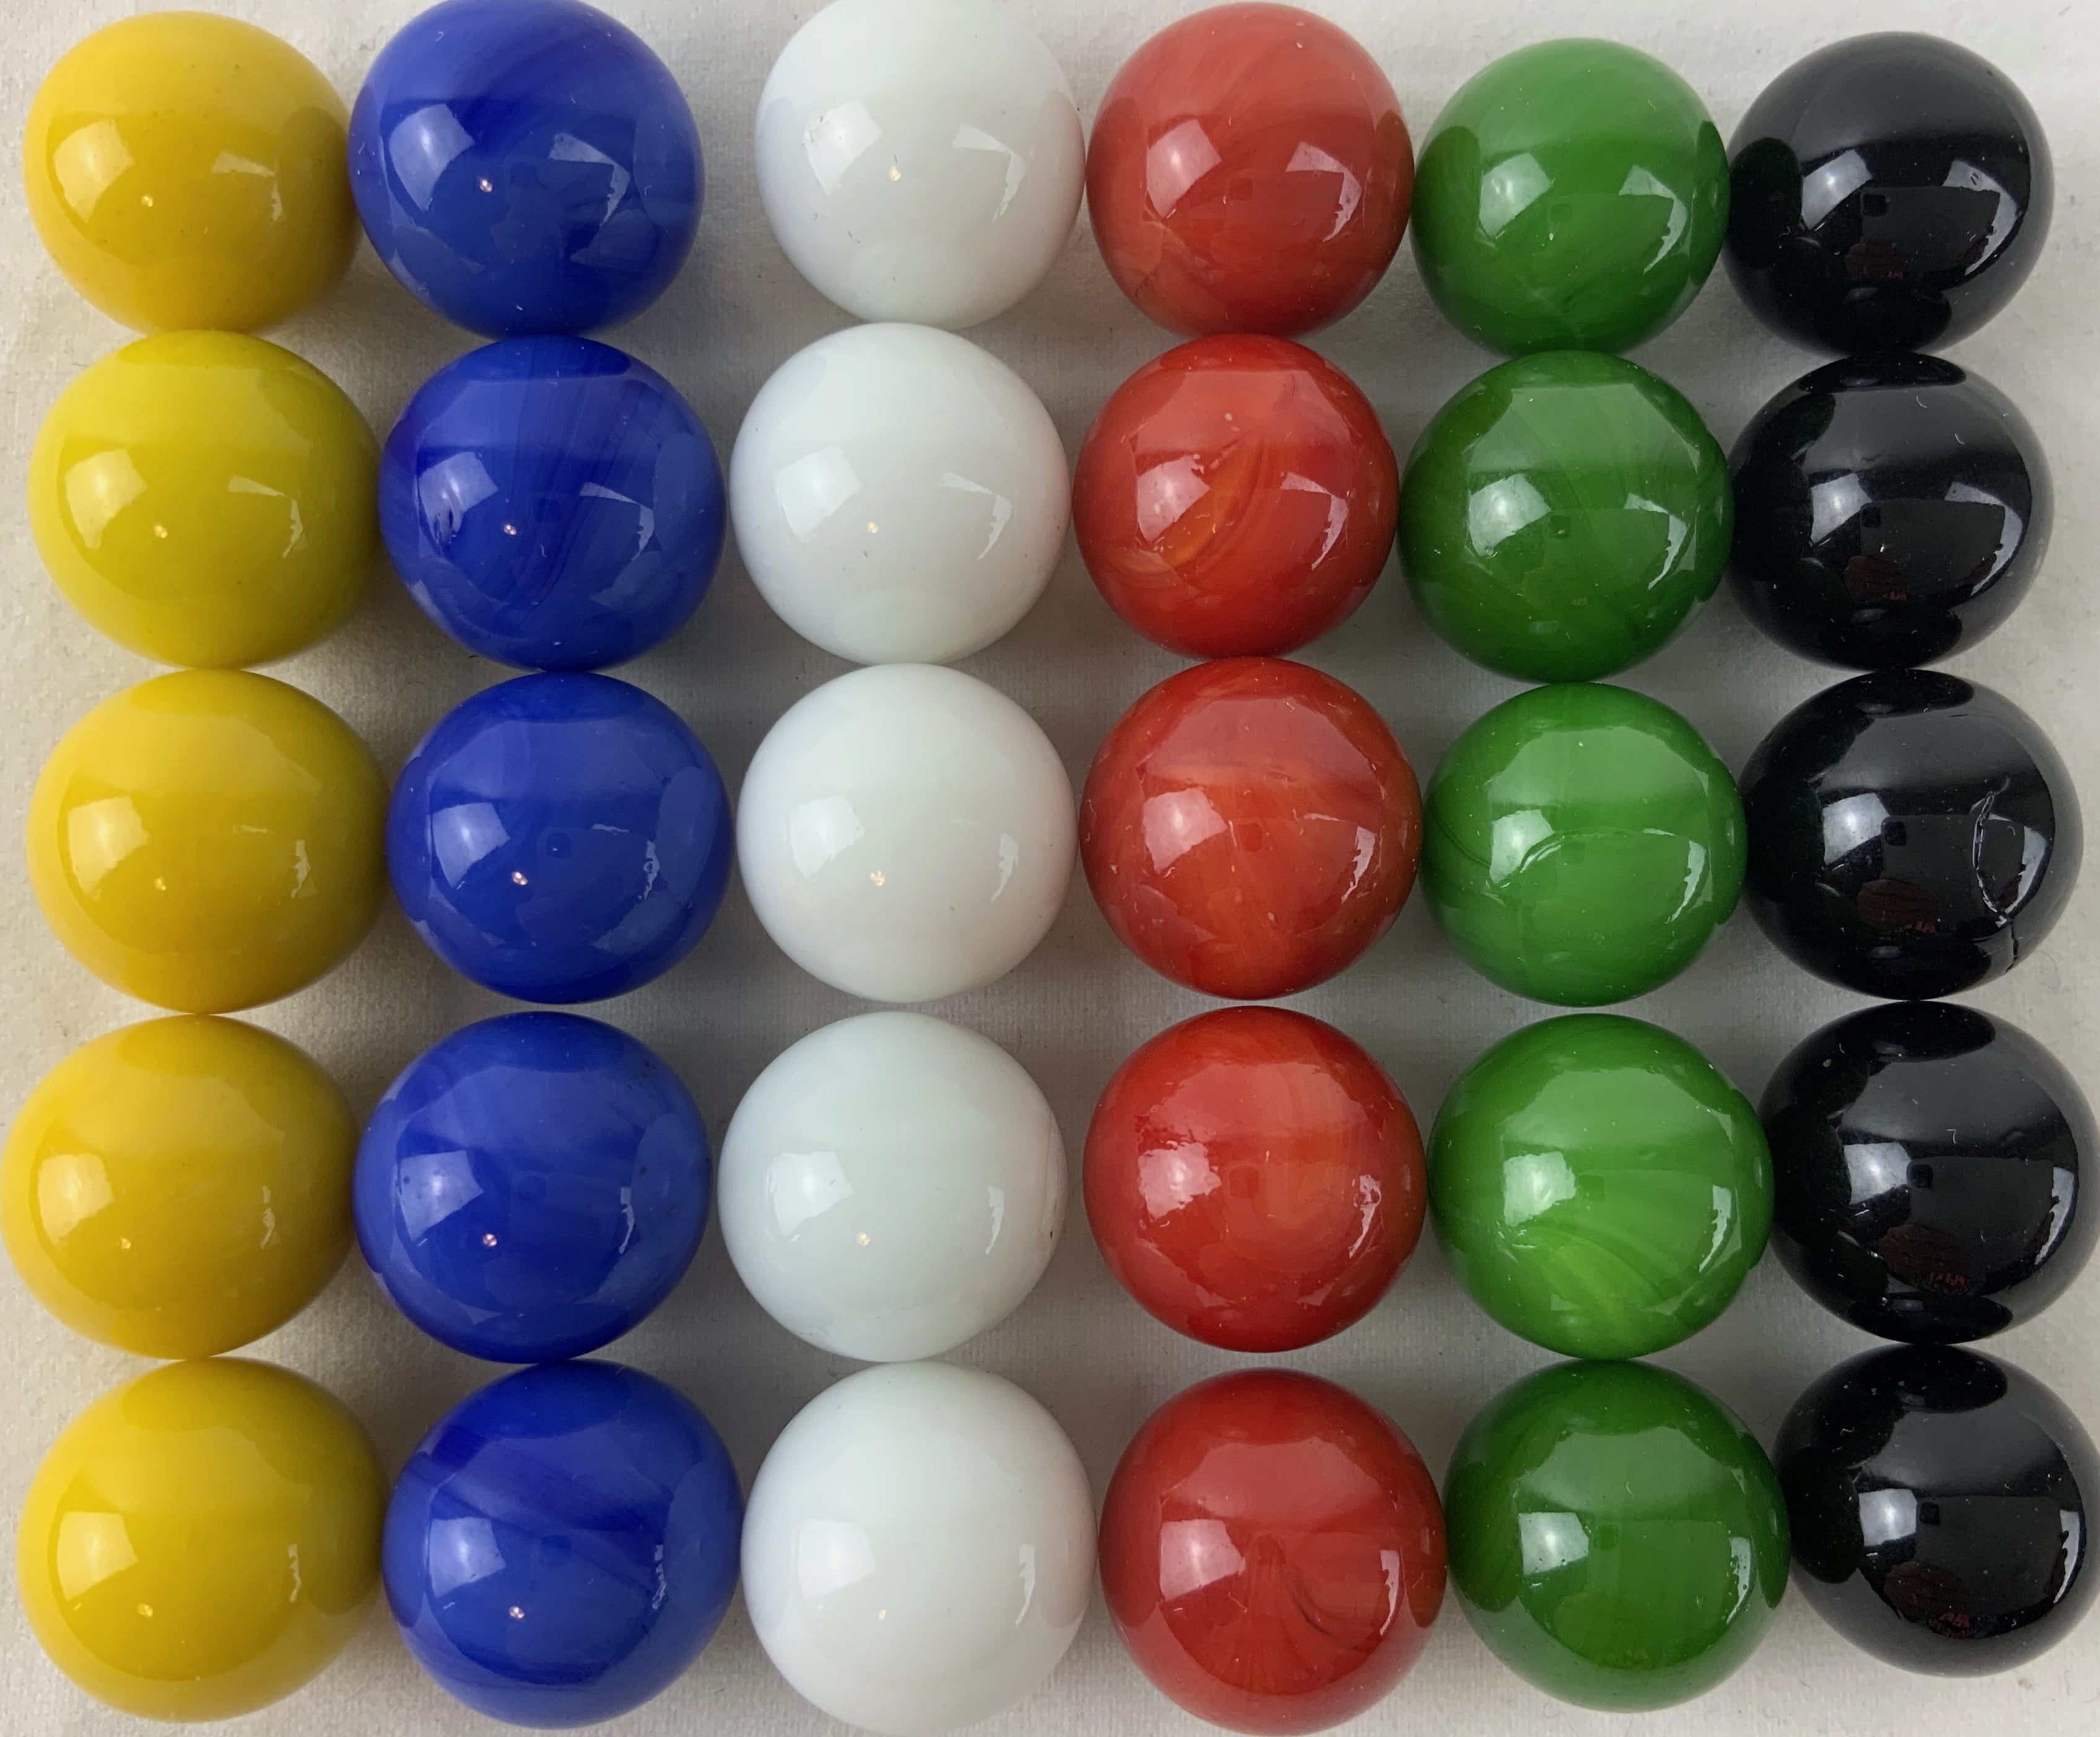 Game Bag of 24 Glass Marbles and 6 Dice for Aggravation Game 14mm